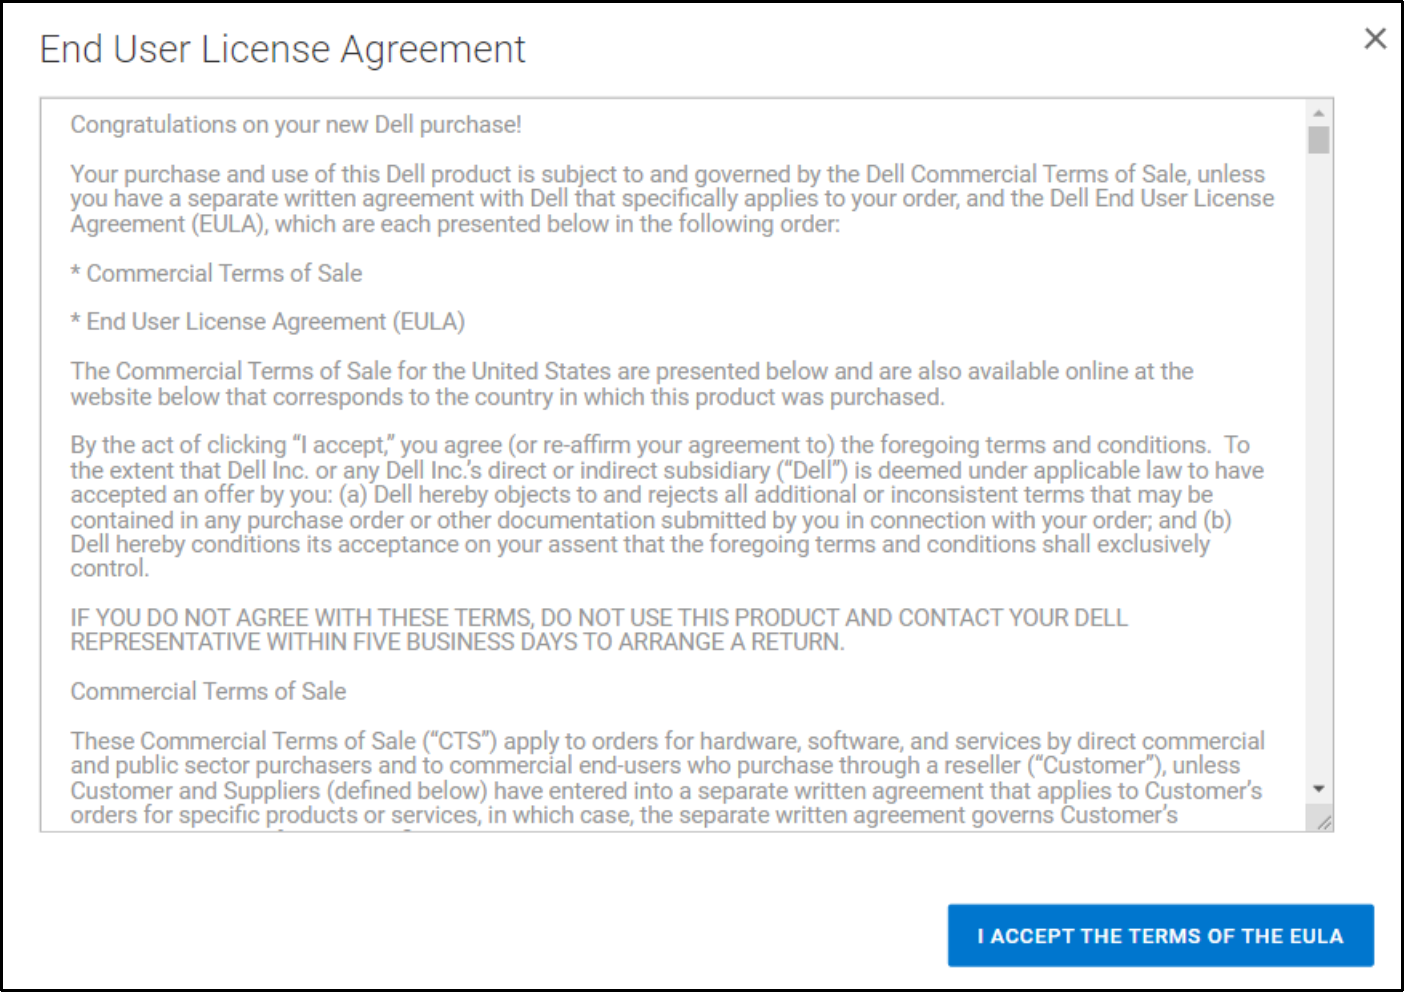 Image showing the End User License Agreement and option to accept the EULA.